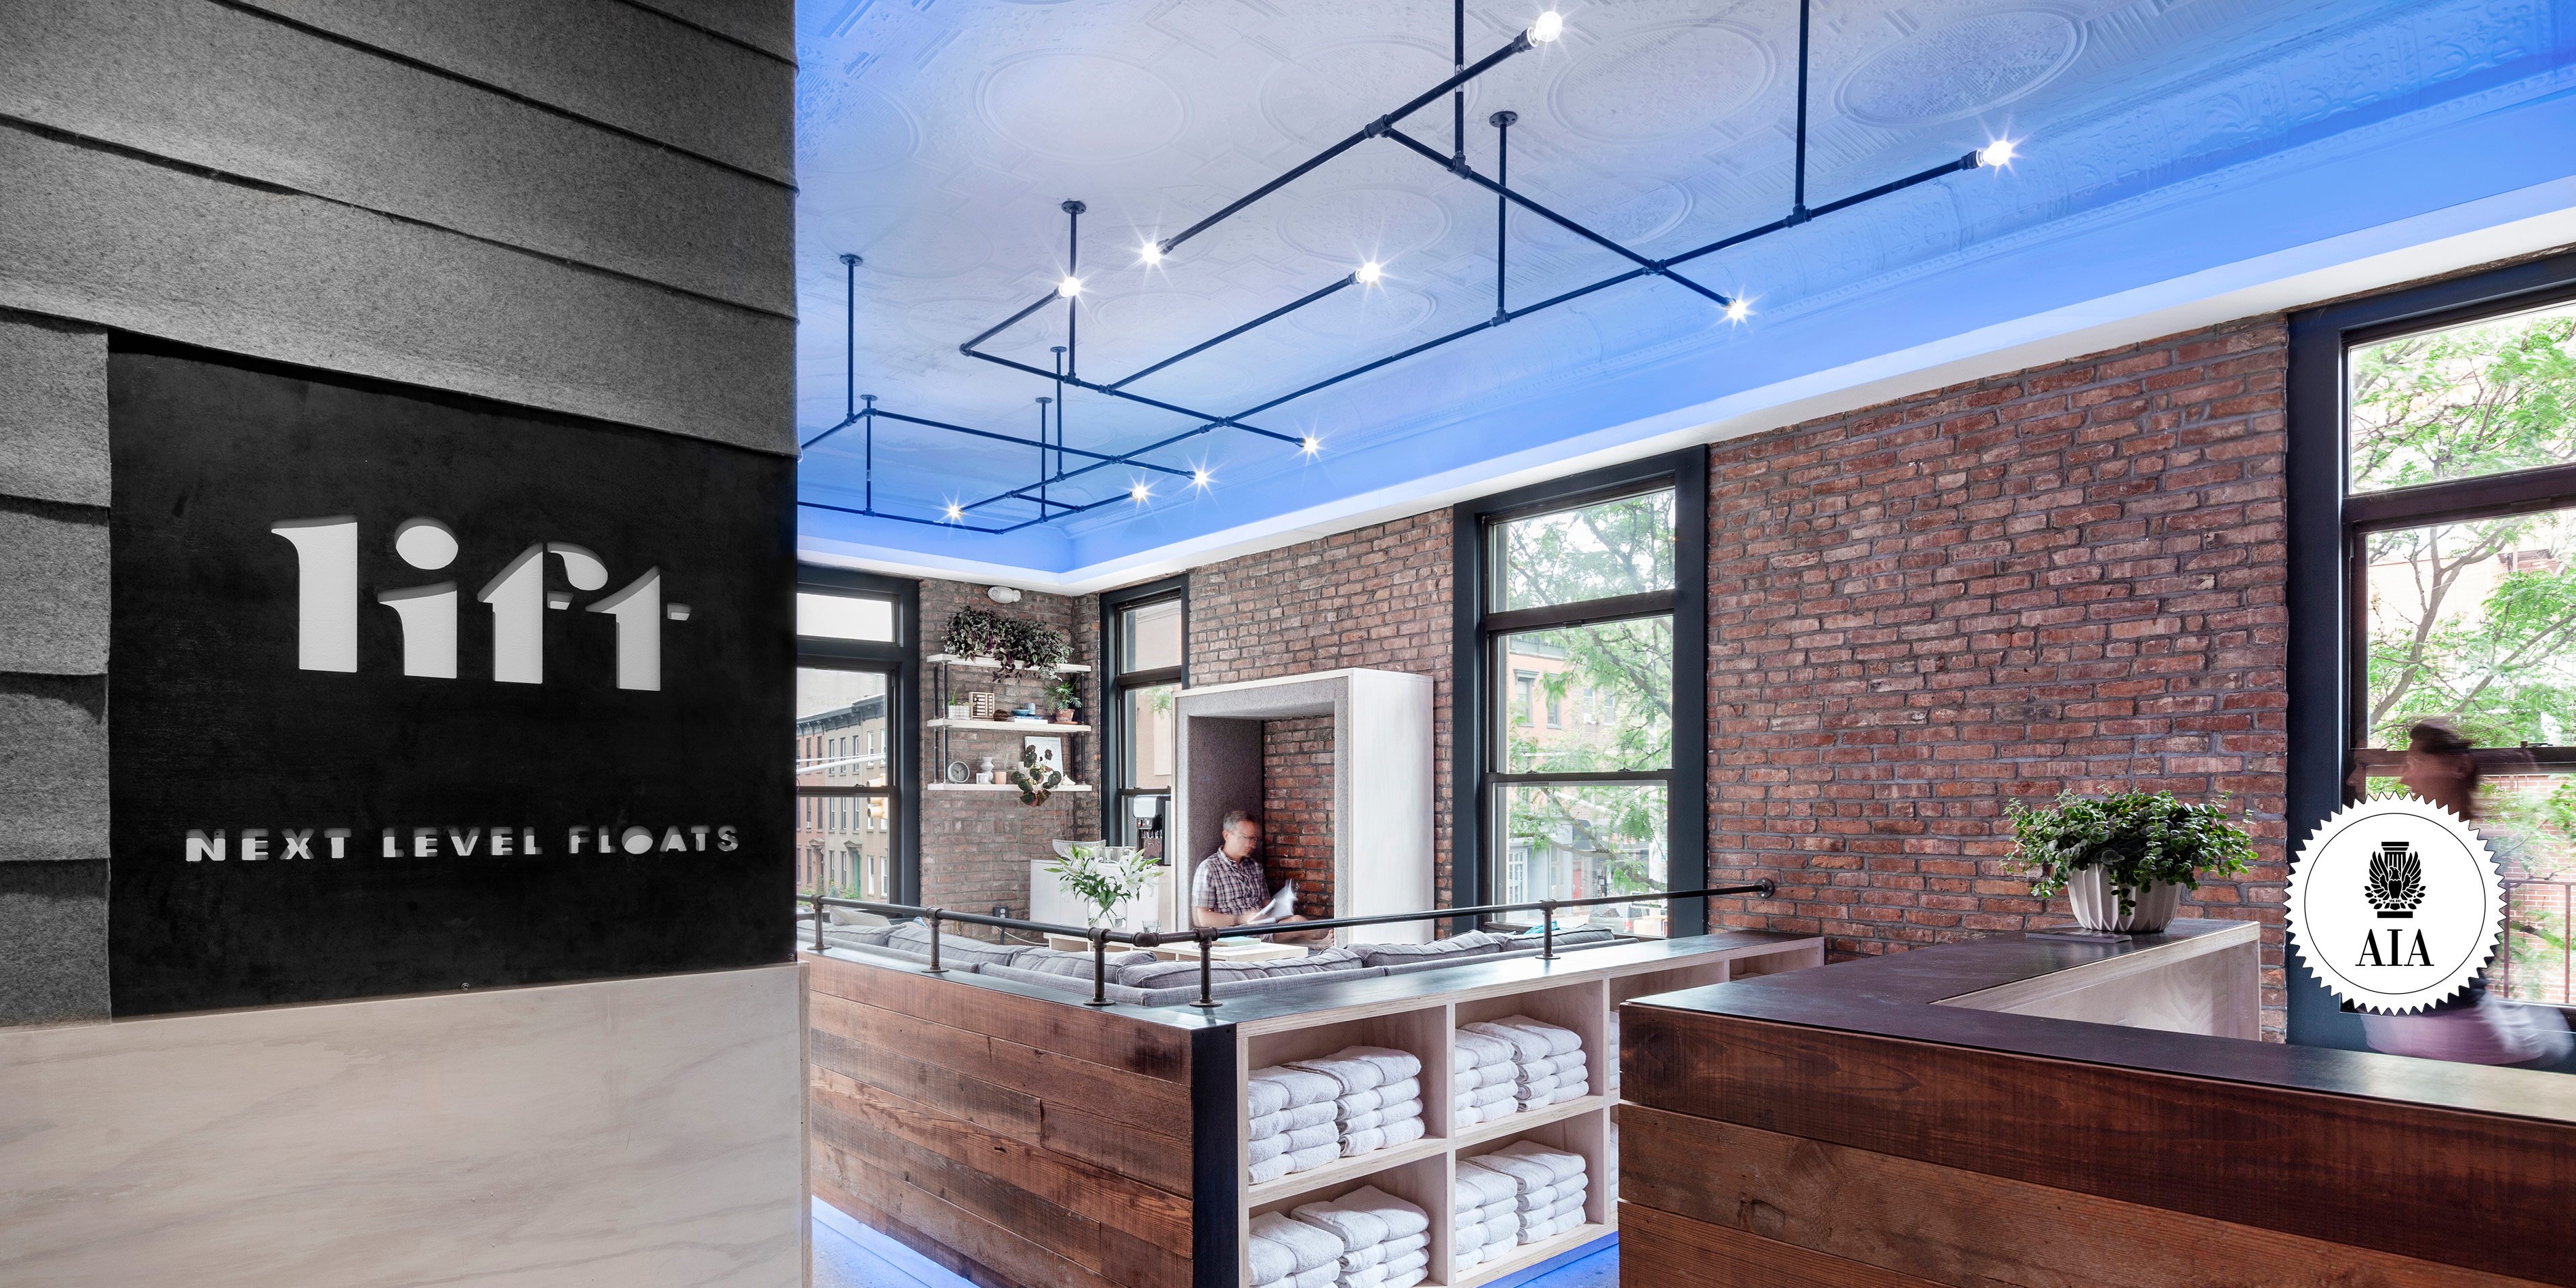 NYC Architect Architecture Modern Wellness Design Float Spa Commercial Renovate Renovation Flotation Therapy Exposed Brick Blue Light Tin Ceiling Reclaimed Timber